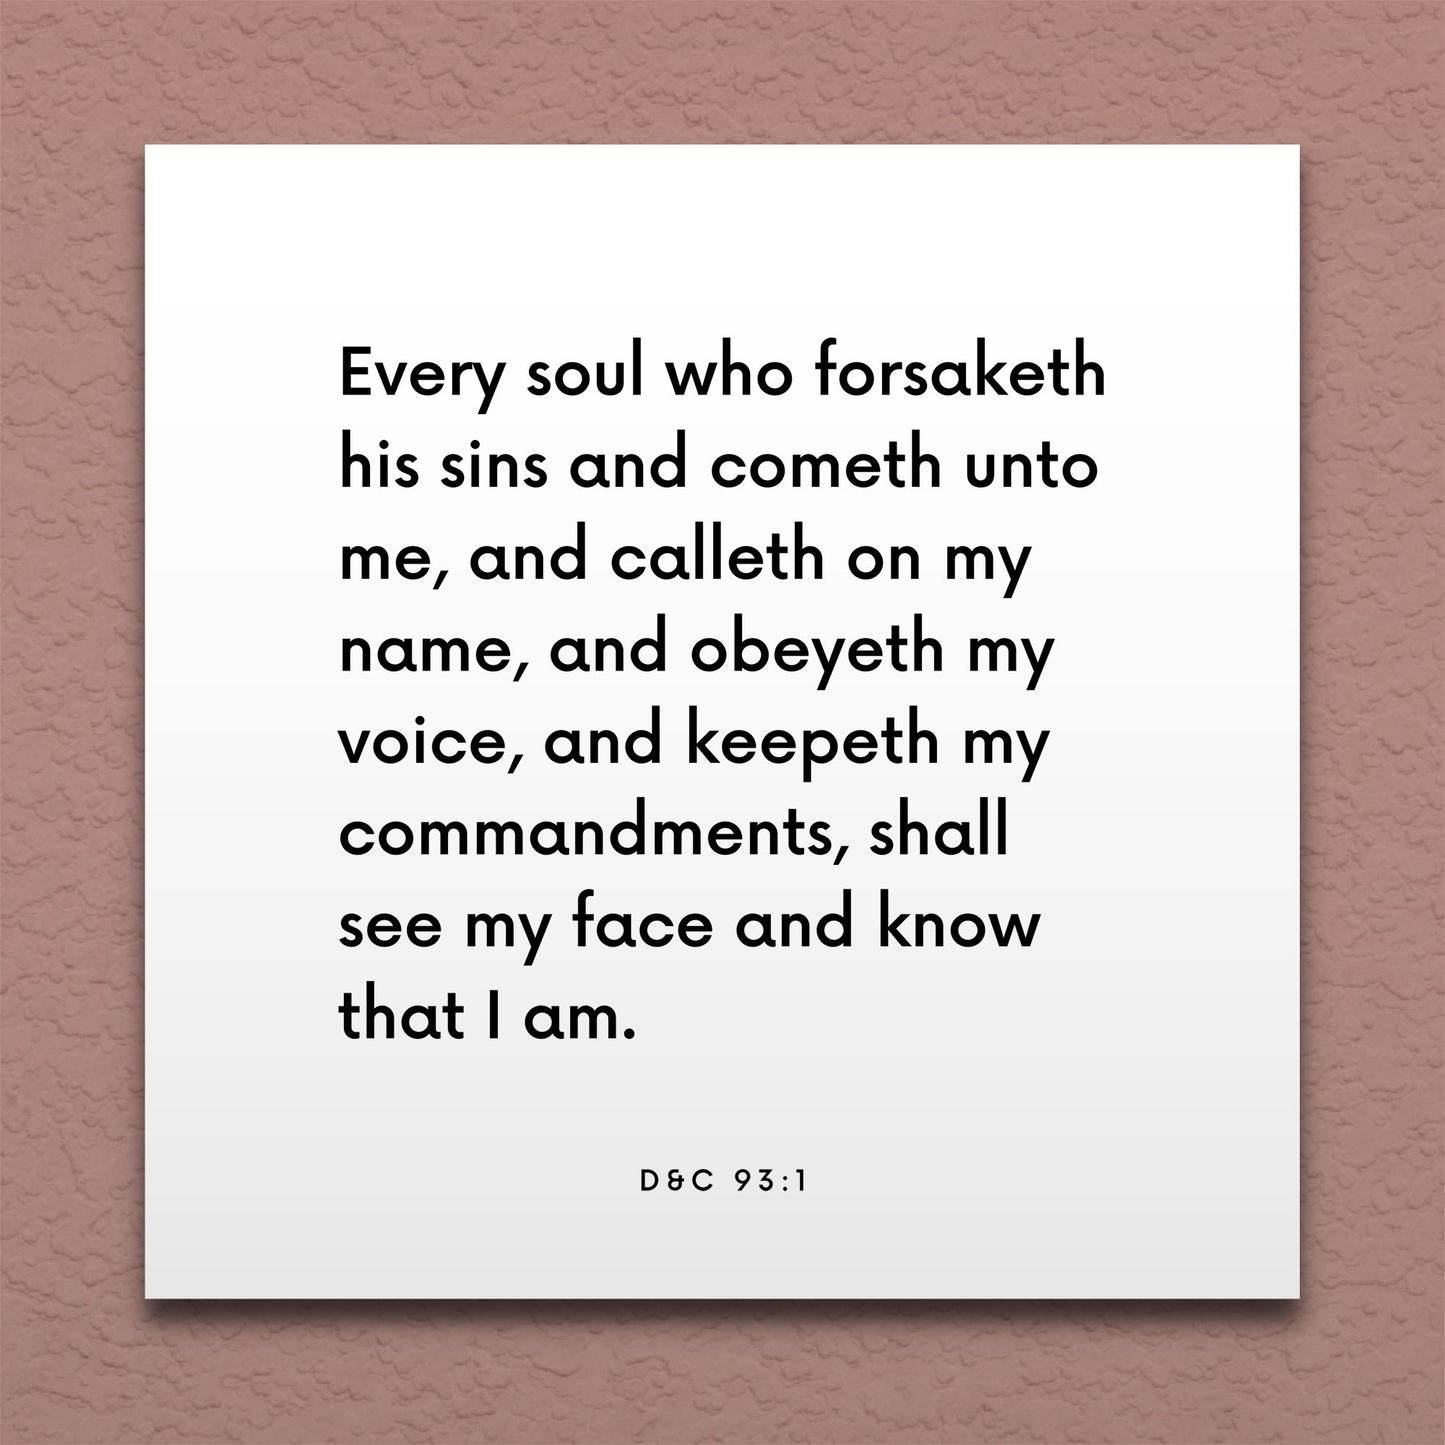 Wall-mounted scripture tile for D&C 93:1 - "Every soul who forsaketh his sins and cometh unto me"